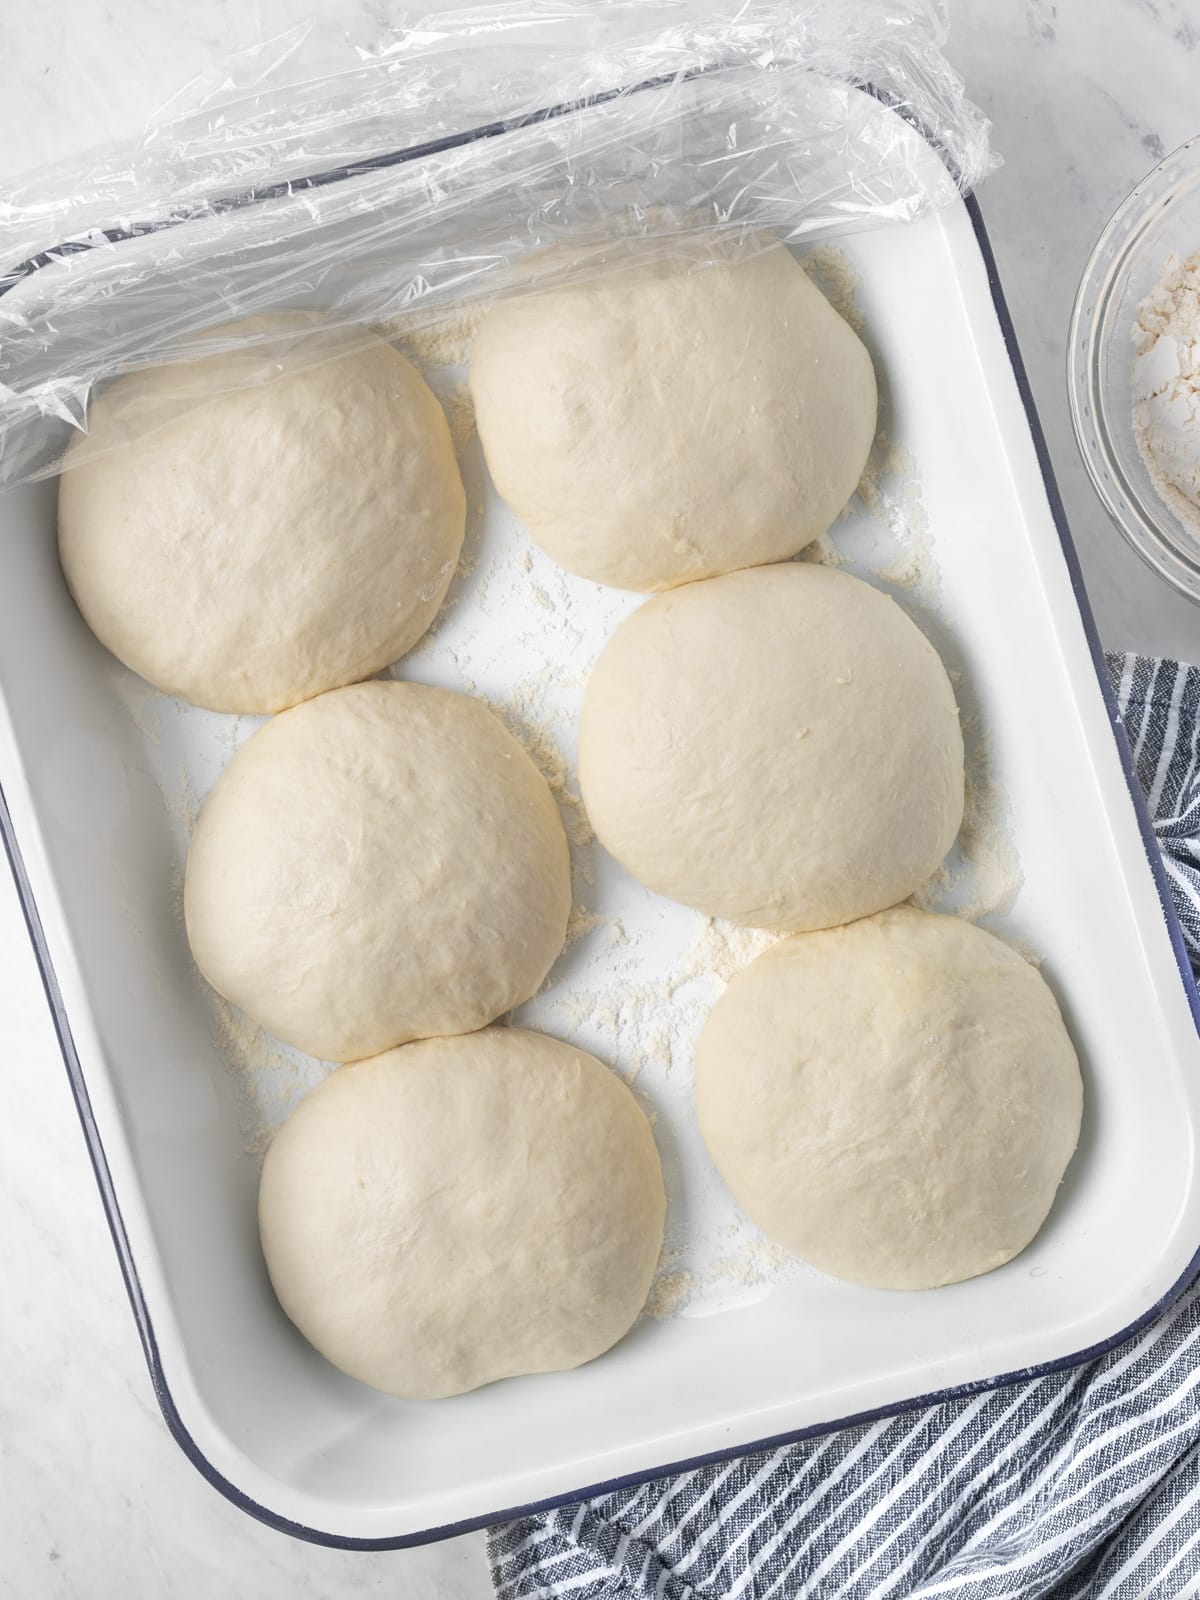 Proofing pan with 6 pizza dough balls.